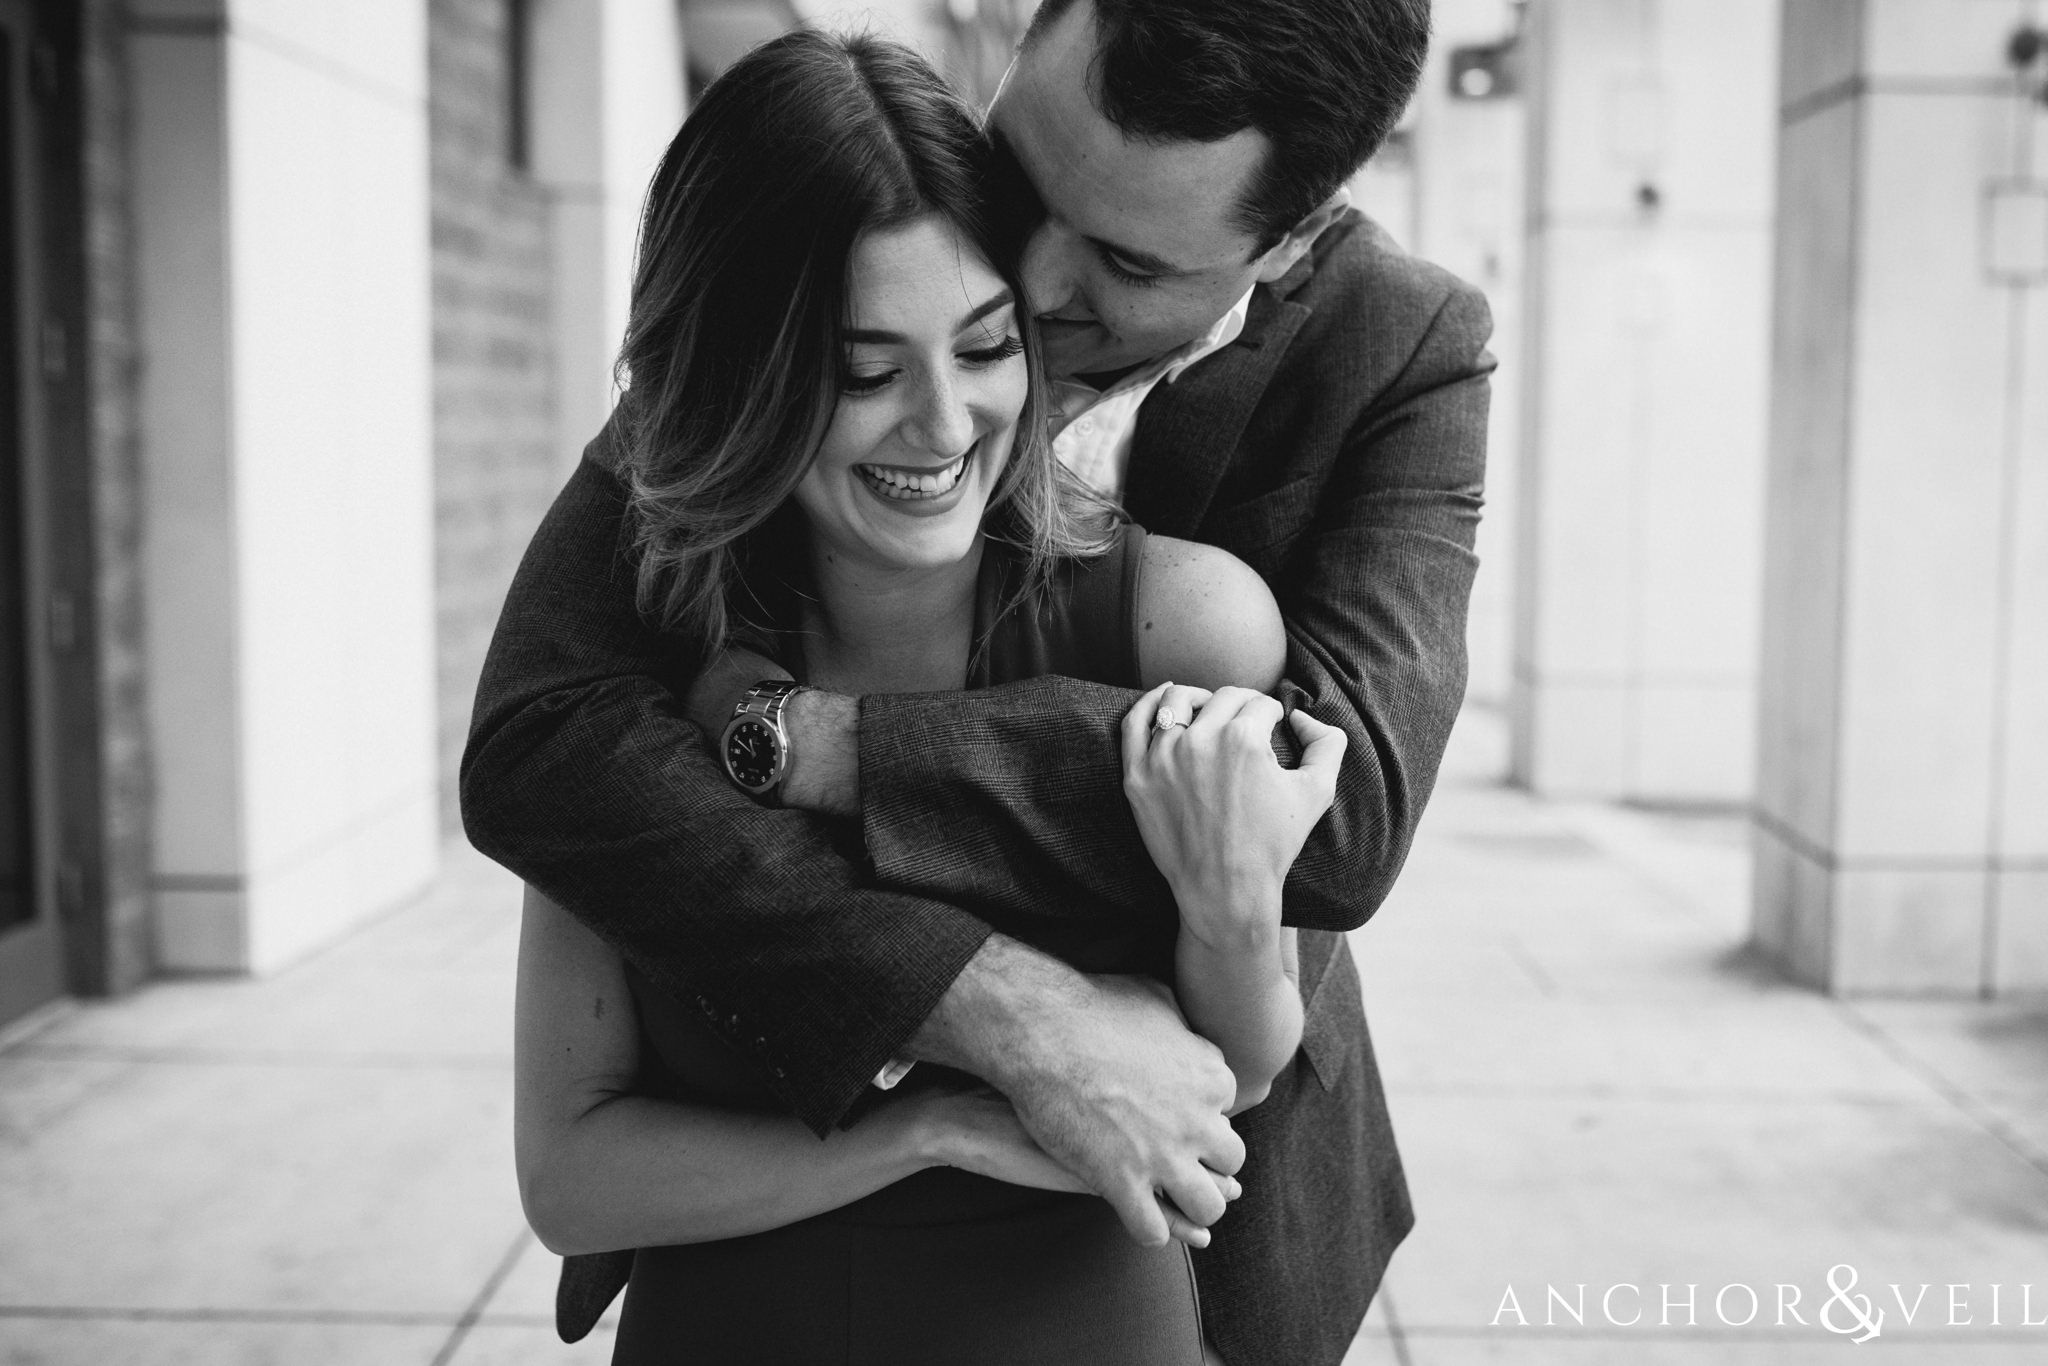 holding her tight during the Uptown Charlotte Sycamore Brewery Engagement Session